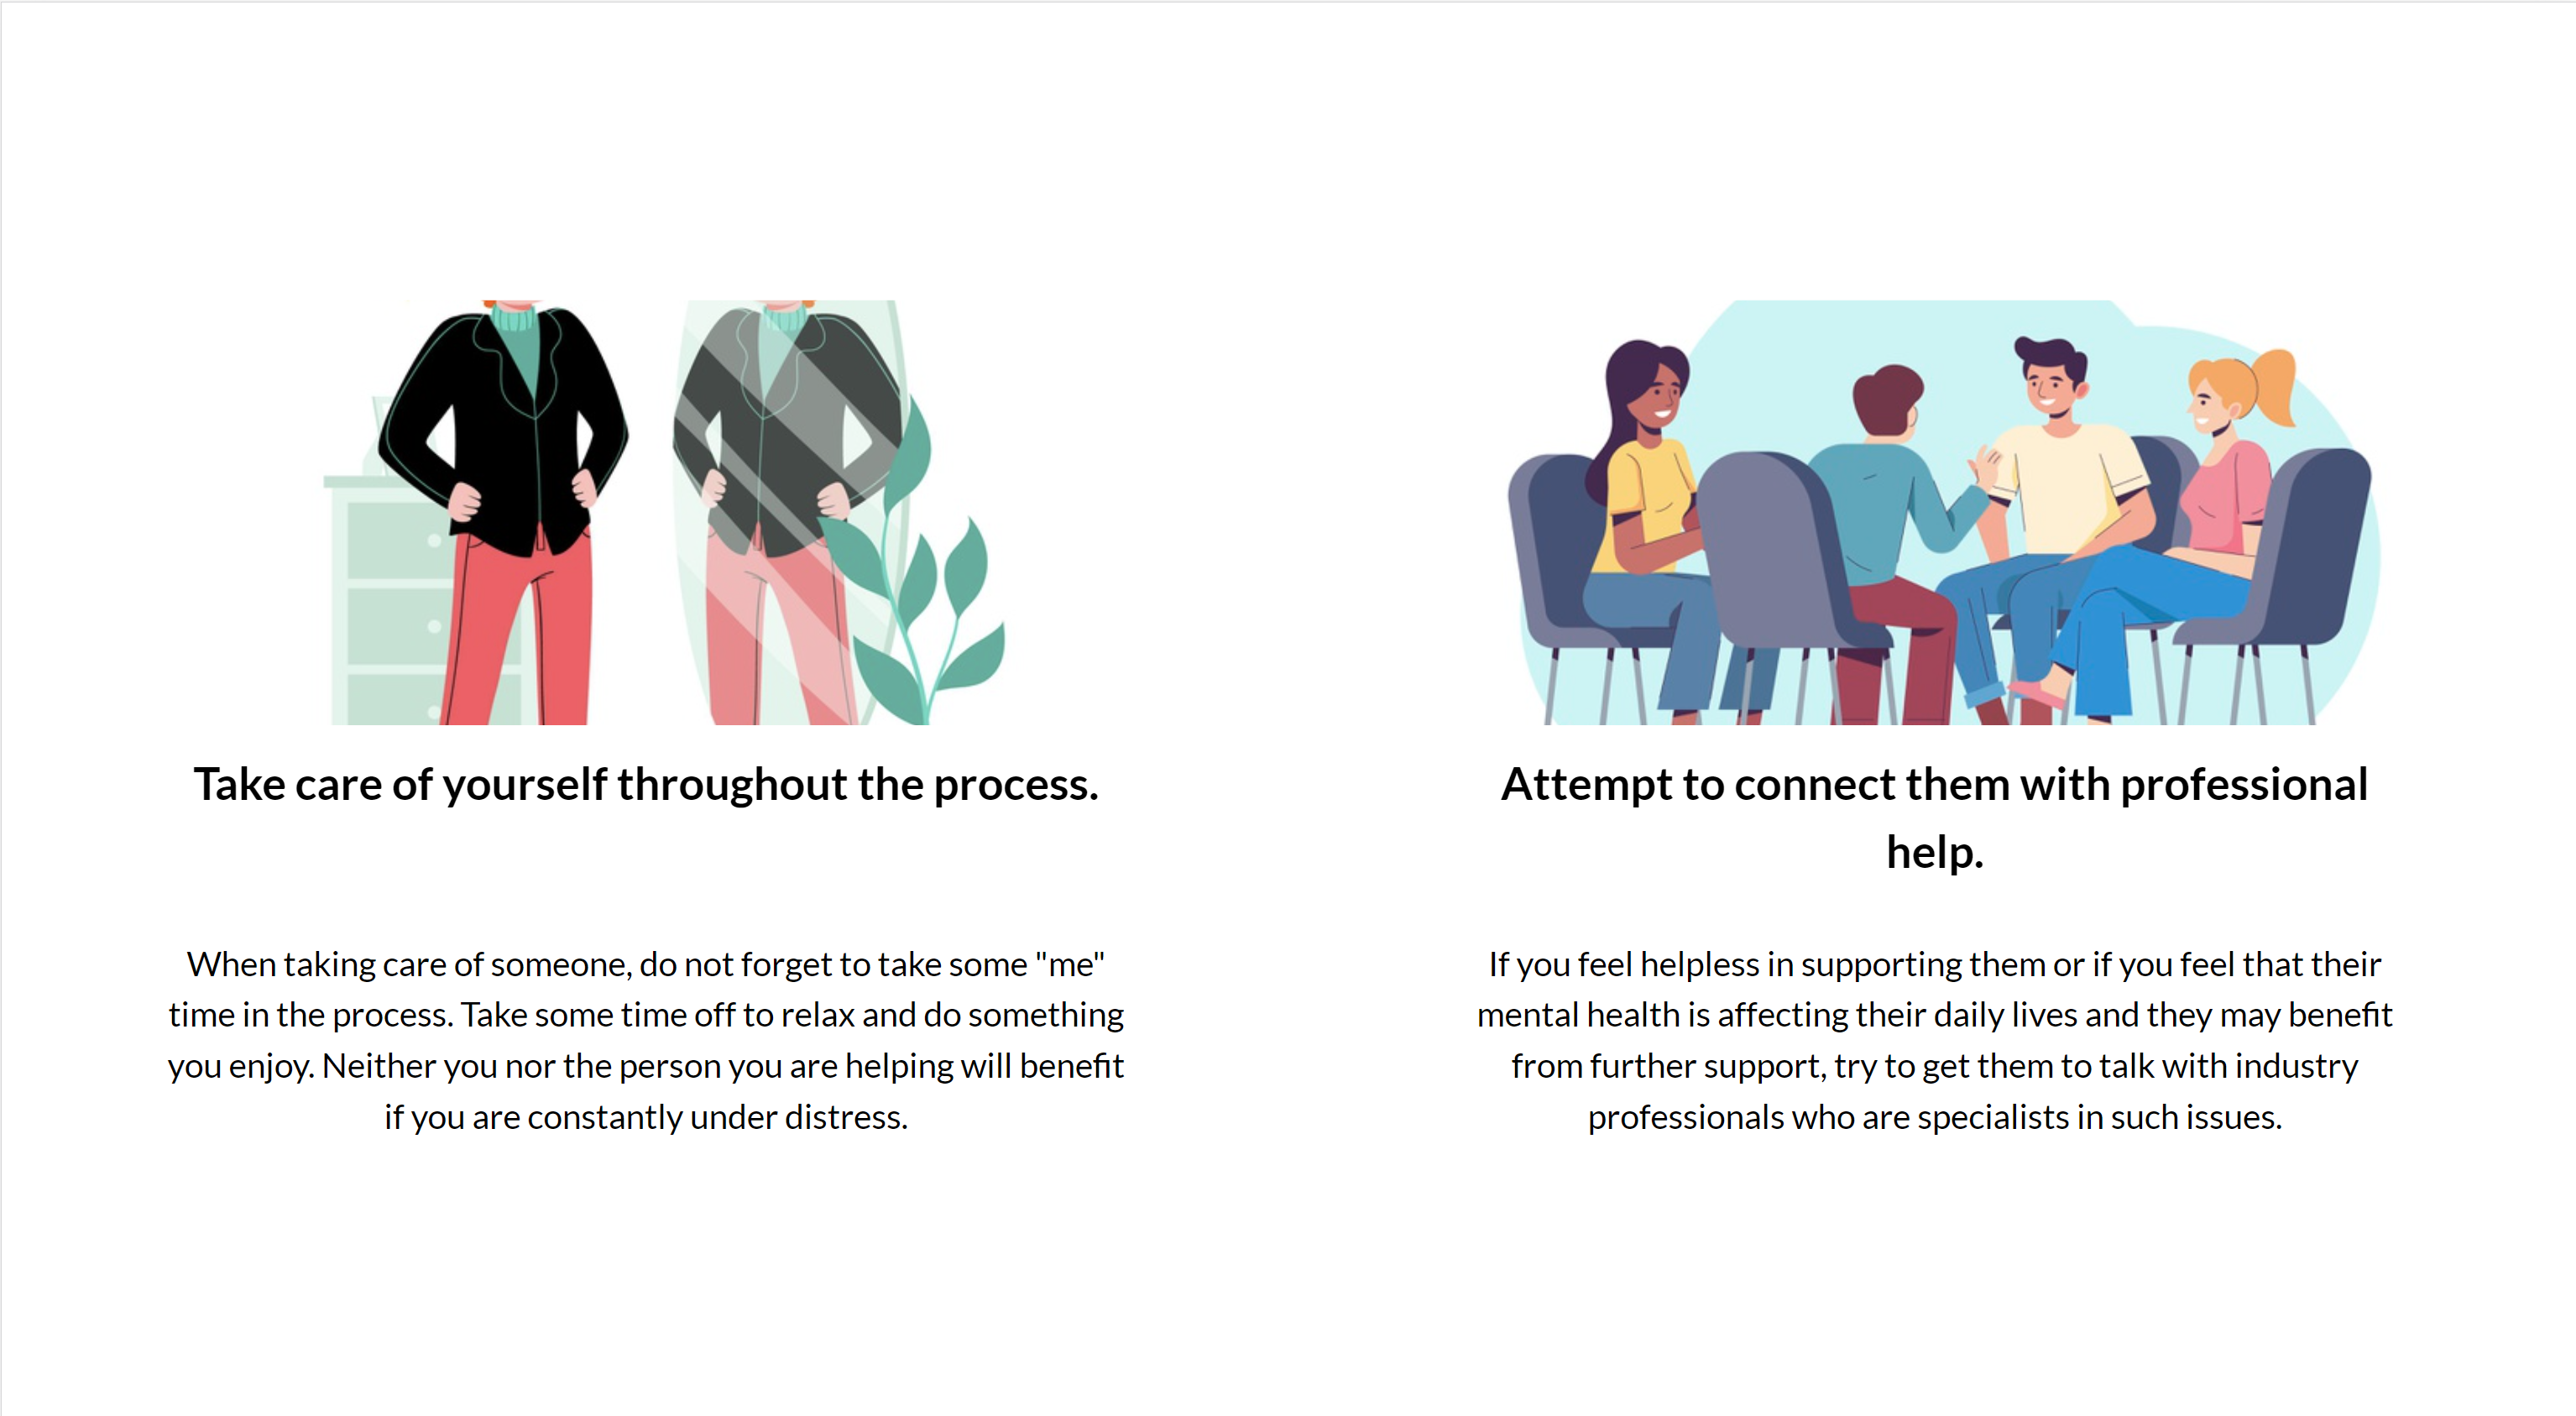 Image showing the cropped version of the image above the 'Take care of yourself throughout the process' header